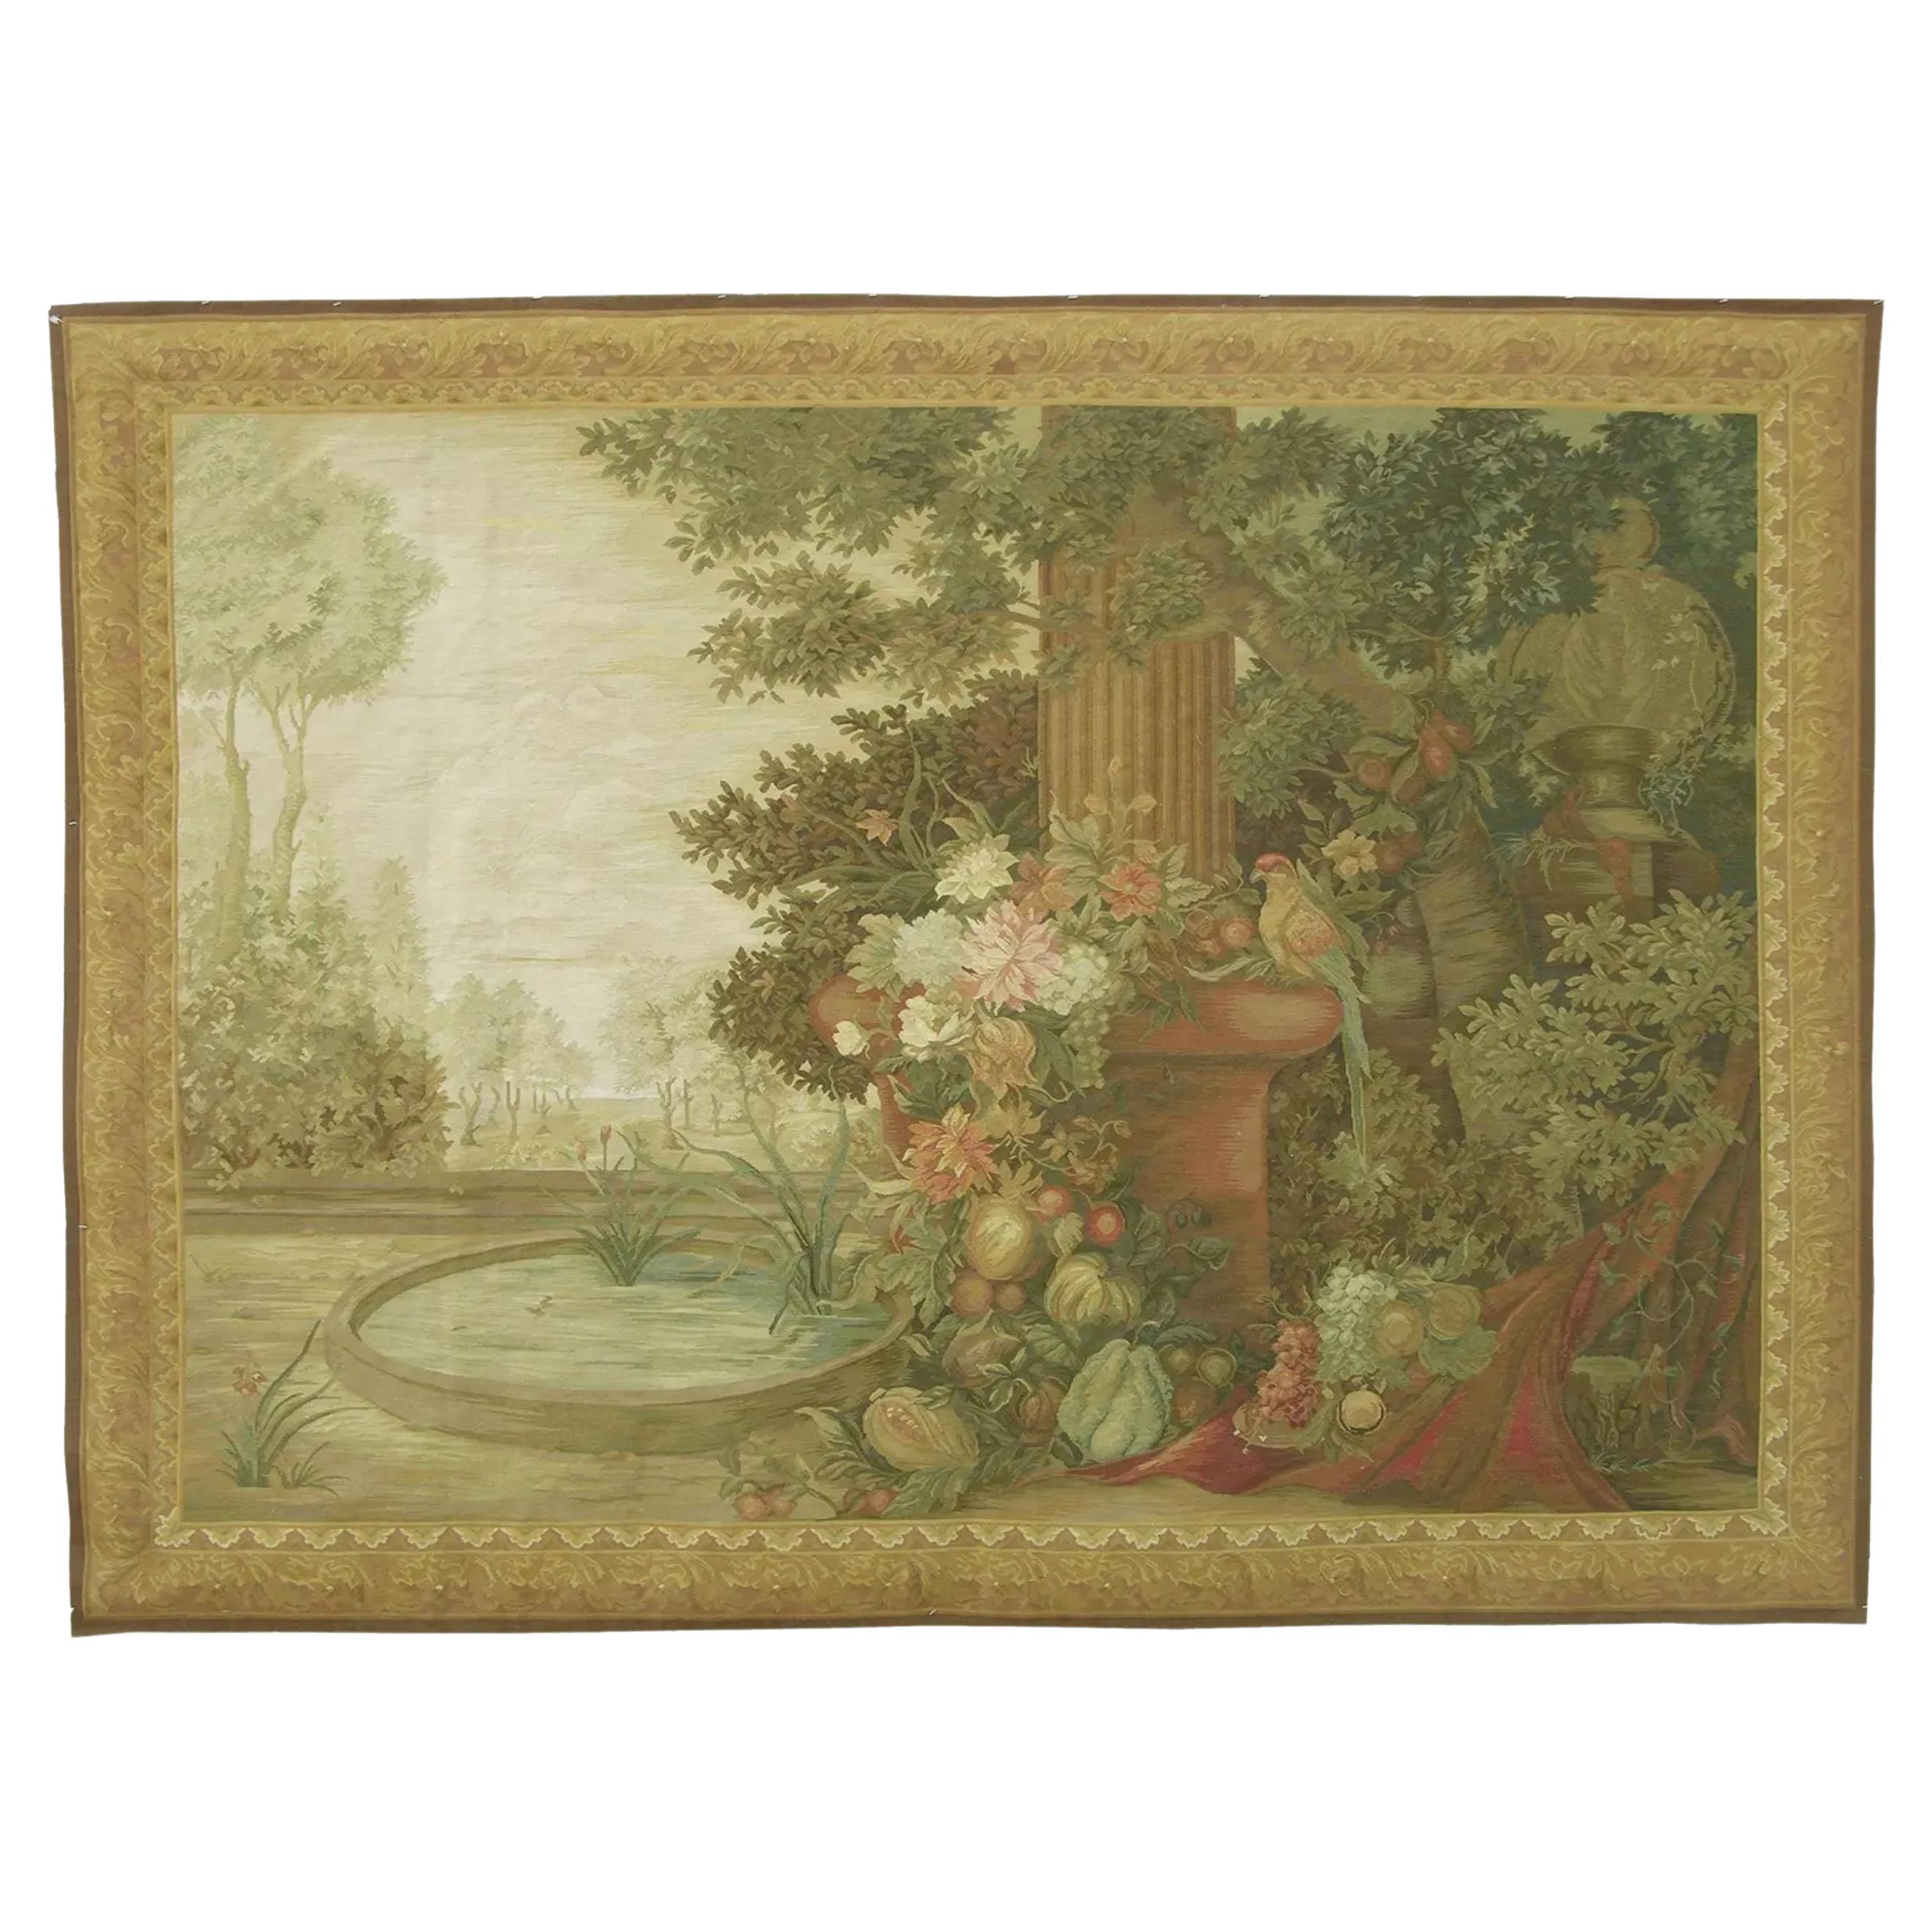 Vintage Woven Floral Scene Tapestry 7.7X5.7